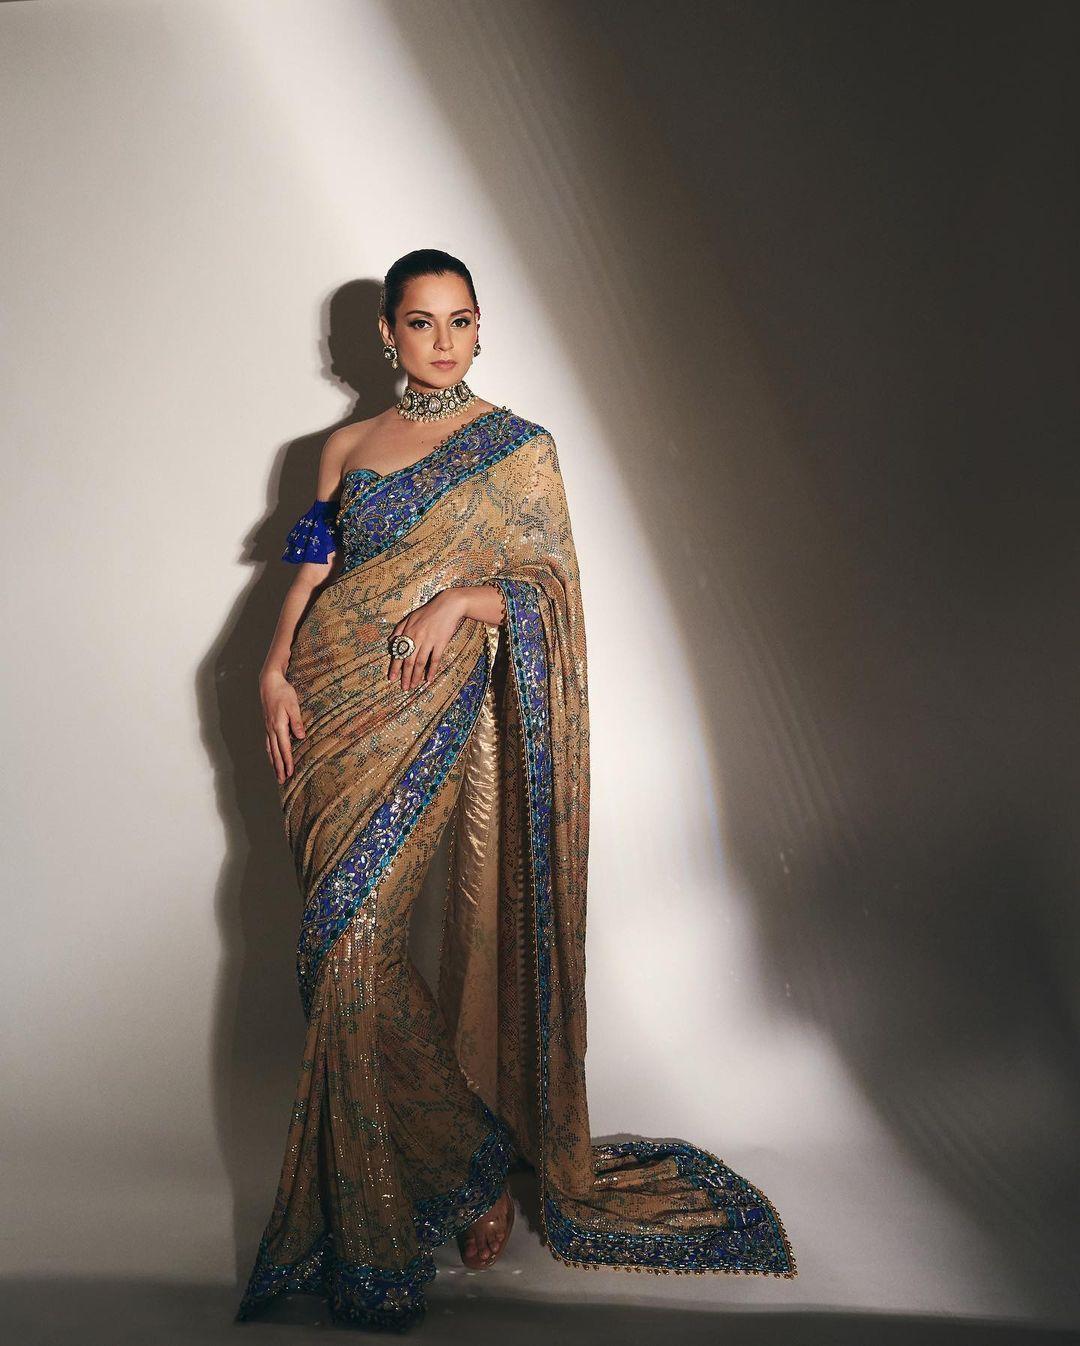 If you are planning to attend any family function, then be ready as we have an amazing outfit choice for you. Kangana wore a beautiful beige saree featuring a contrasting blue border and paired it with an off-shoulder top